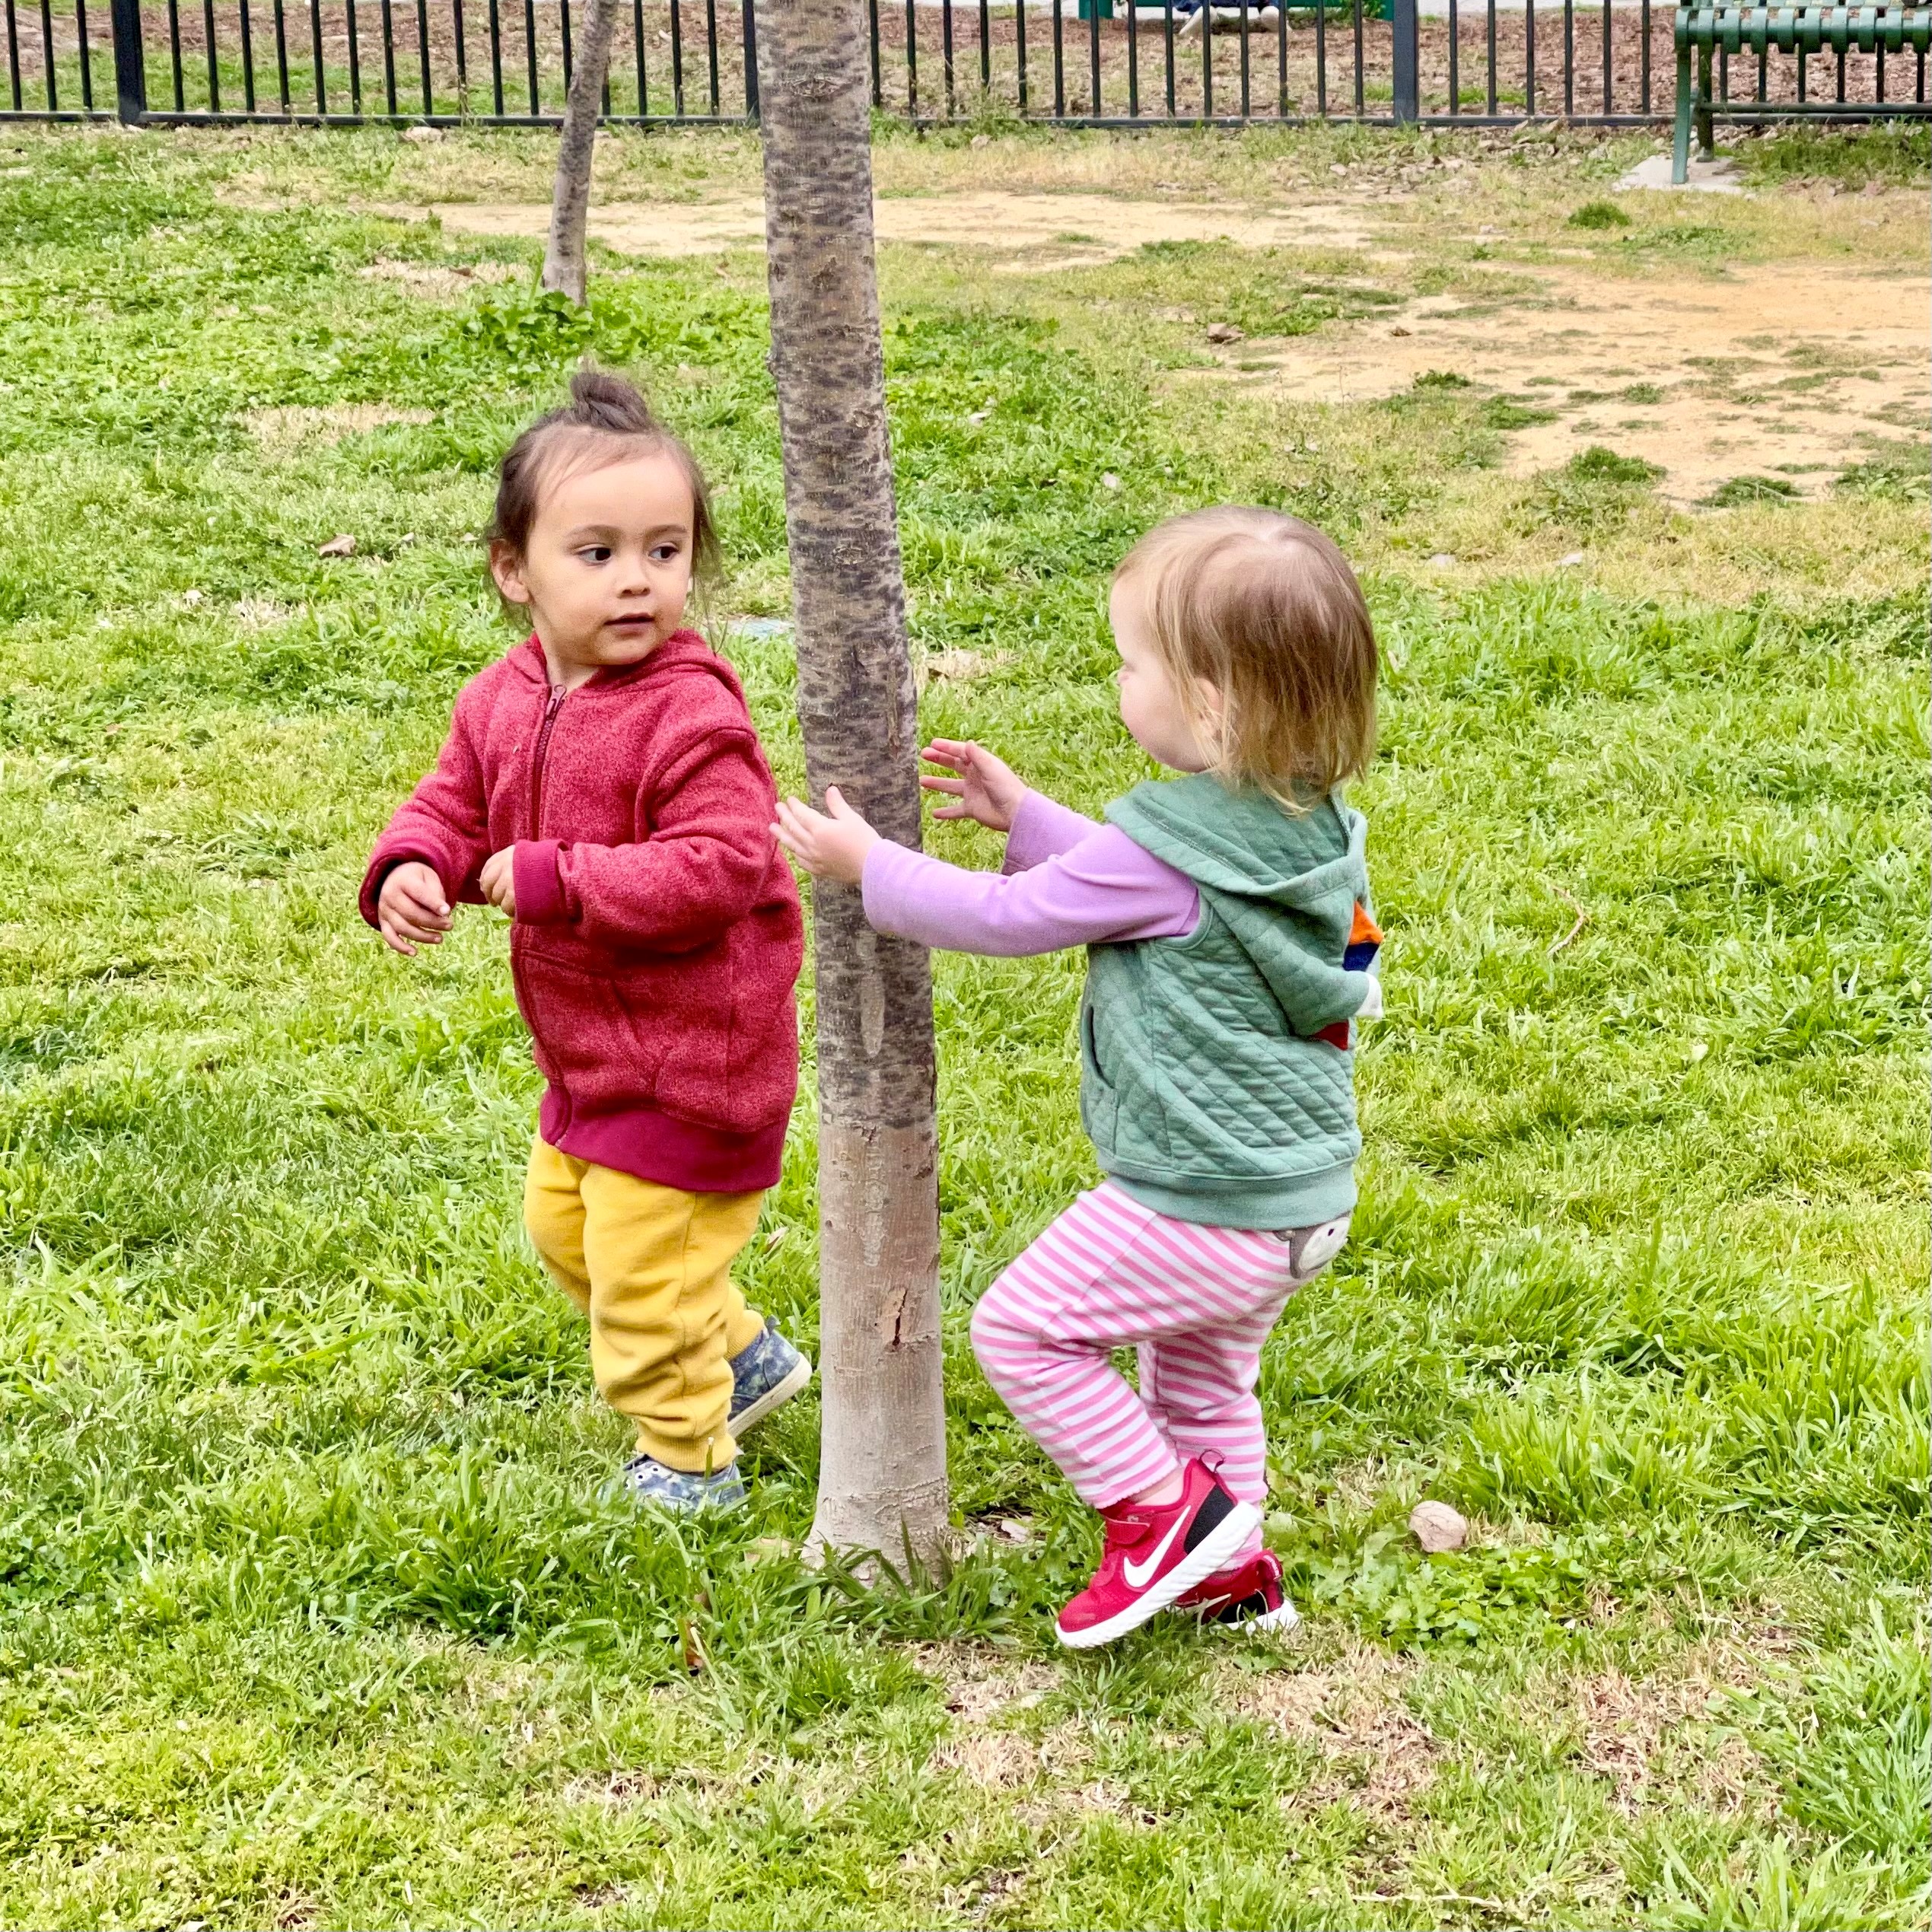 Louisa and Inti playing. Rossano.